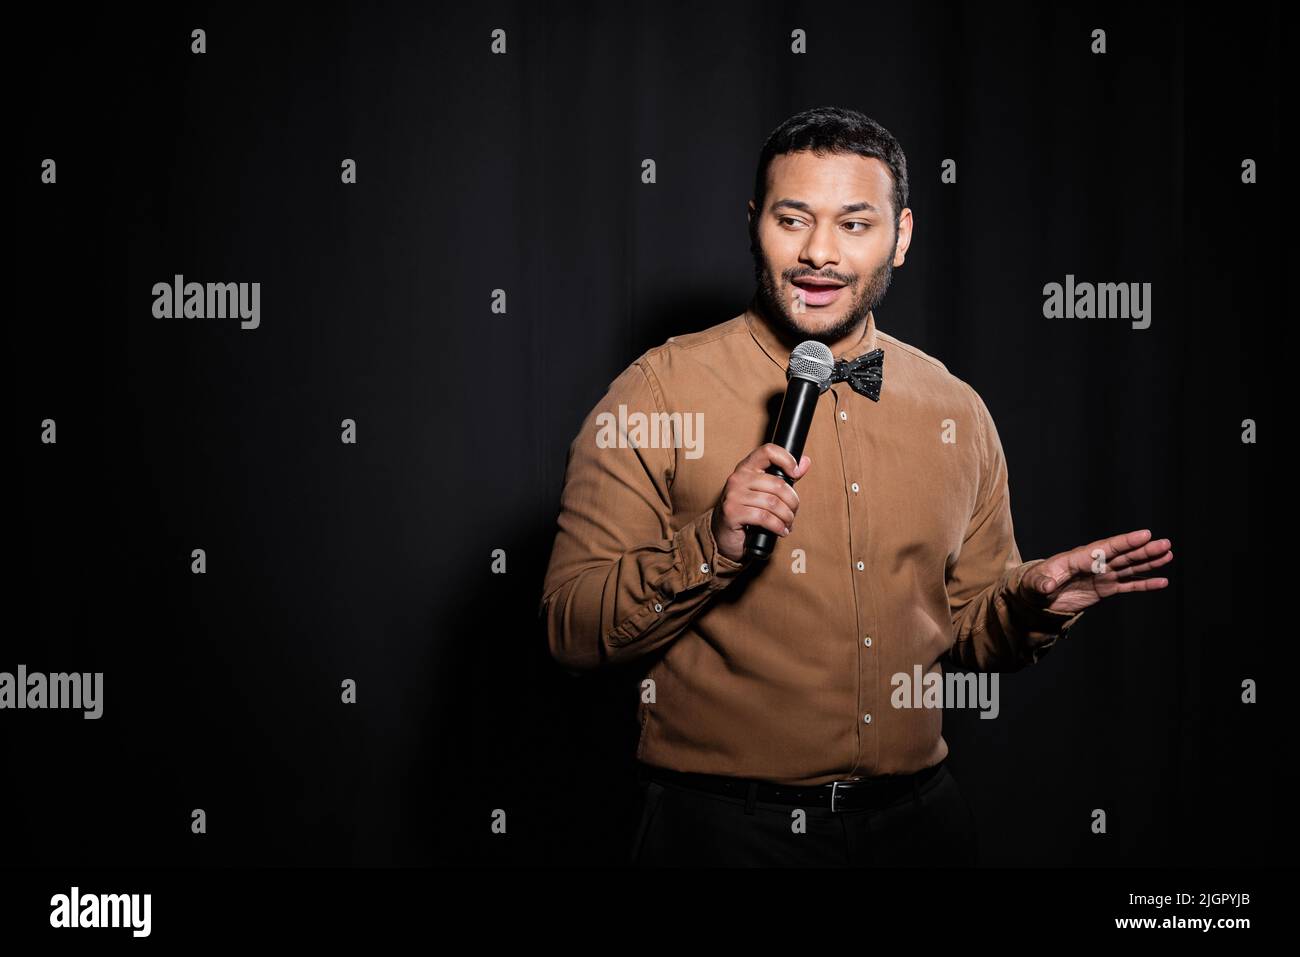 indian stand up comedian with bow tie holding microphone during monologue on black Stock Photo